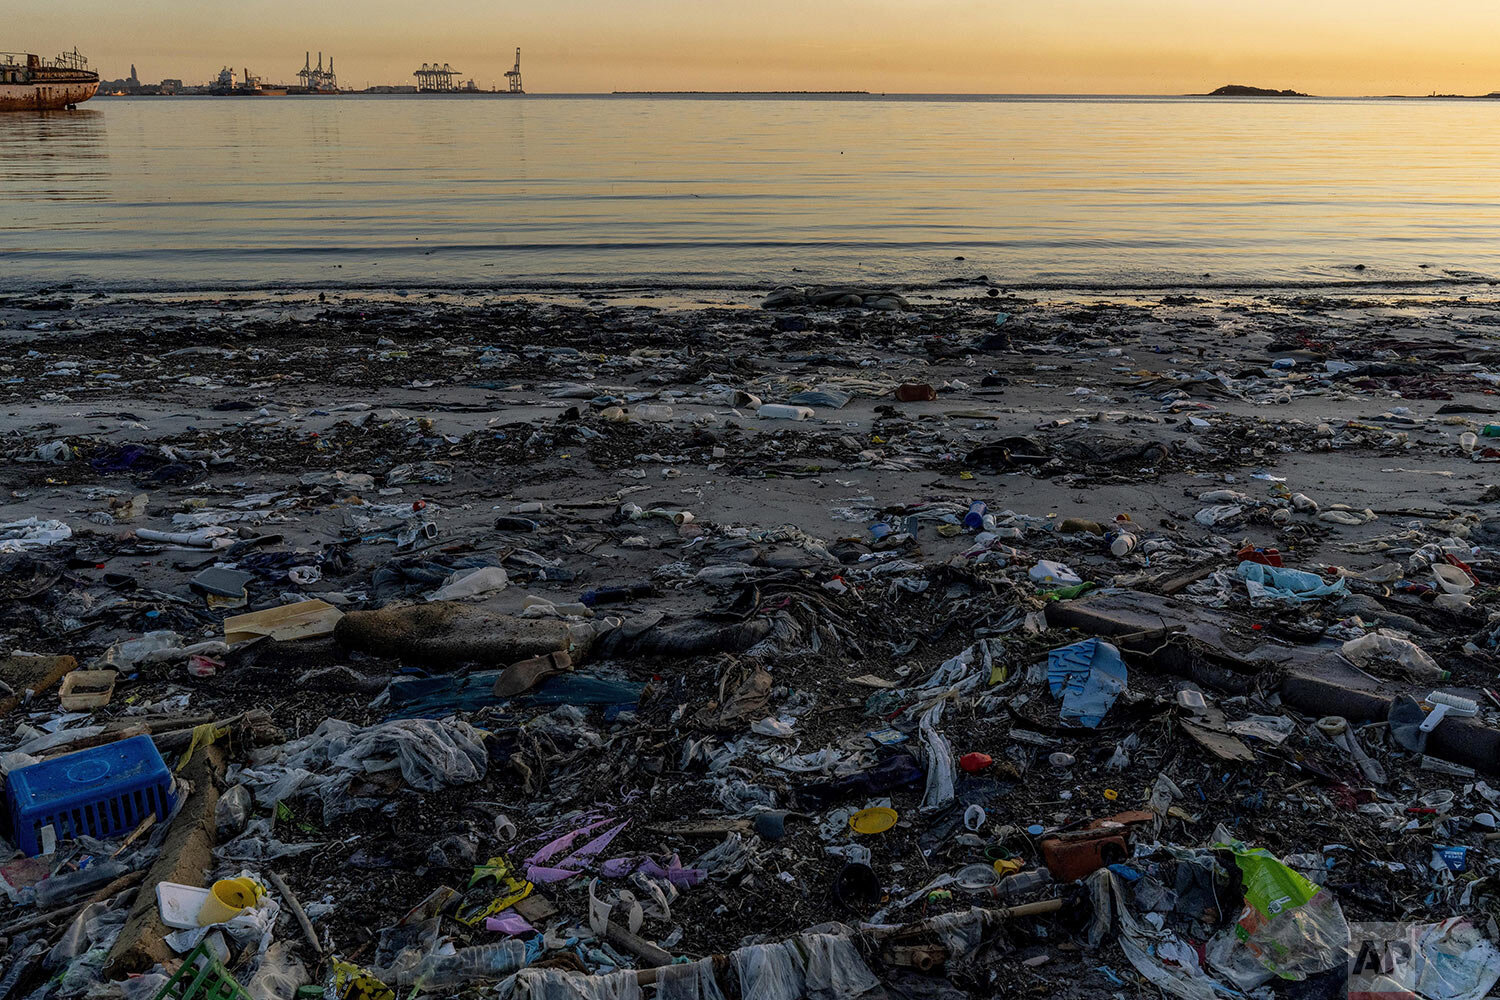  Garbage litters Capurro Beach in the bay of Montevideo, Uruguay, Dec. 2, 2019. The UN Climate Change Conference COP25 kicked off in Madrid with urgent calls to make serious progress on climate action. (AP Photo/Matilde Campodonico) 